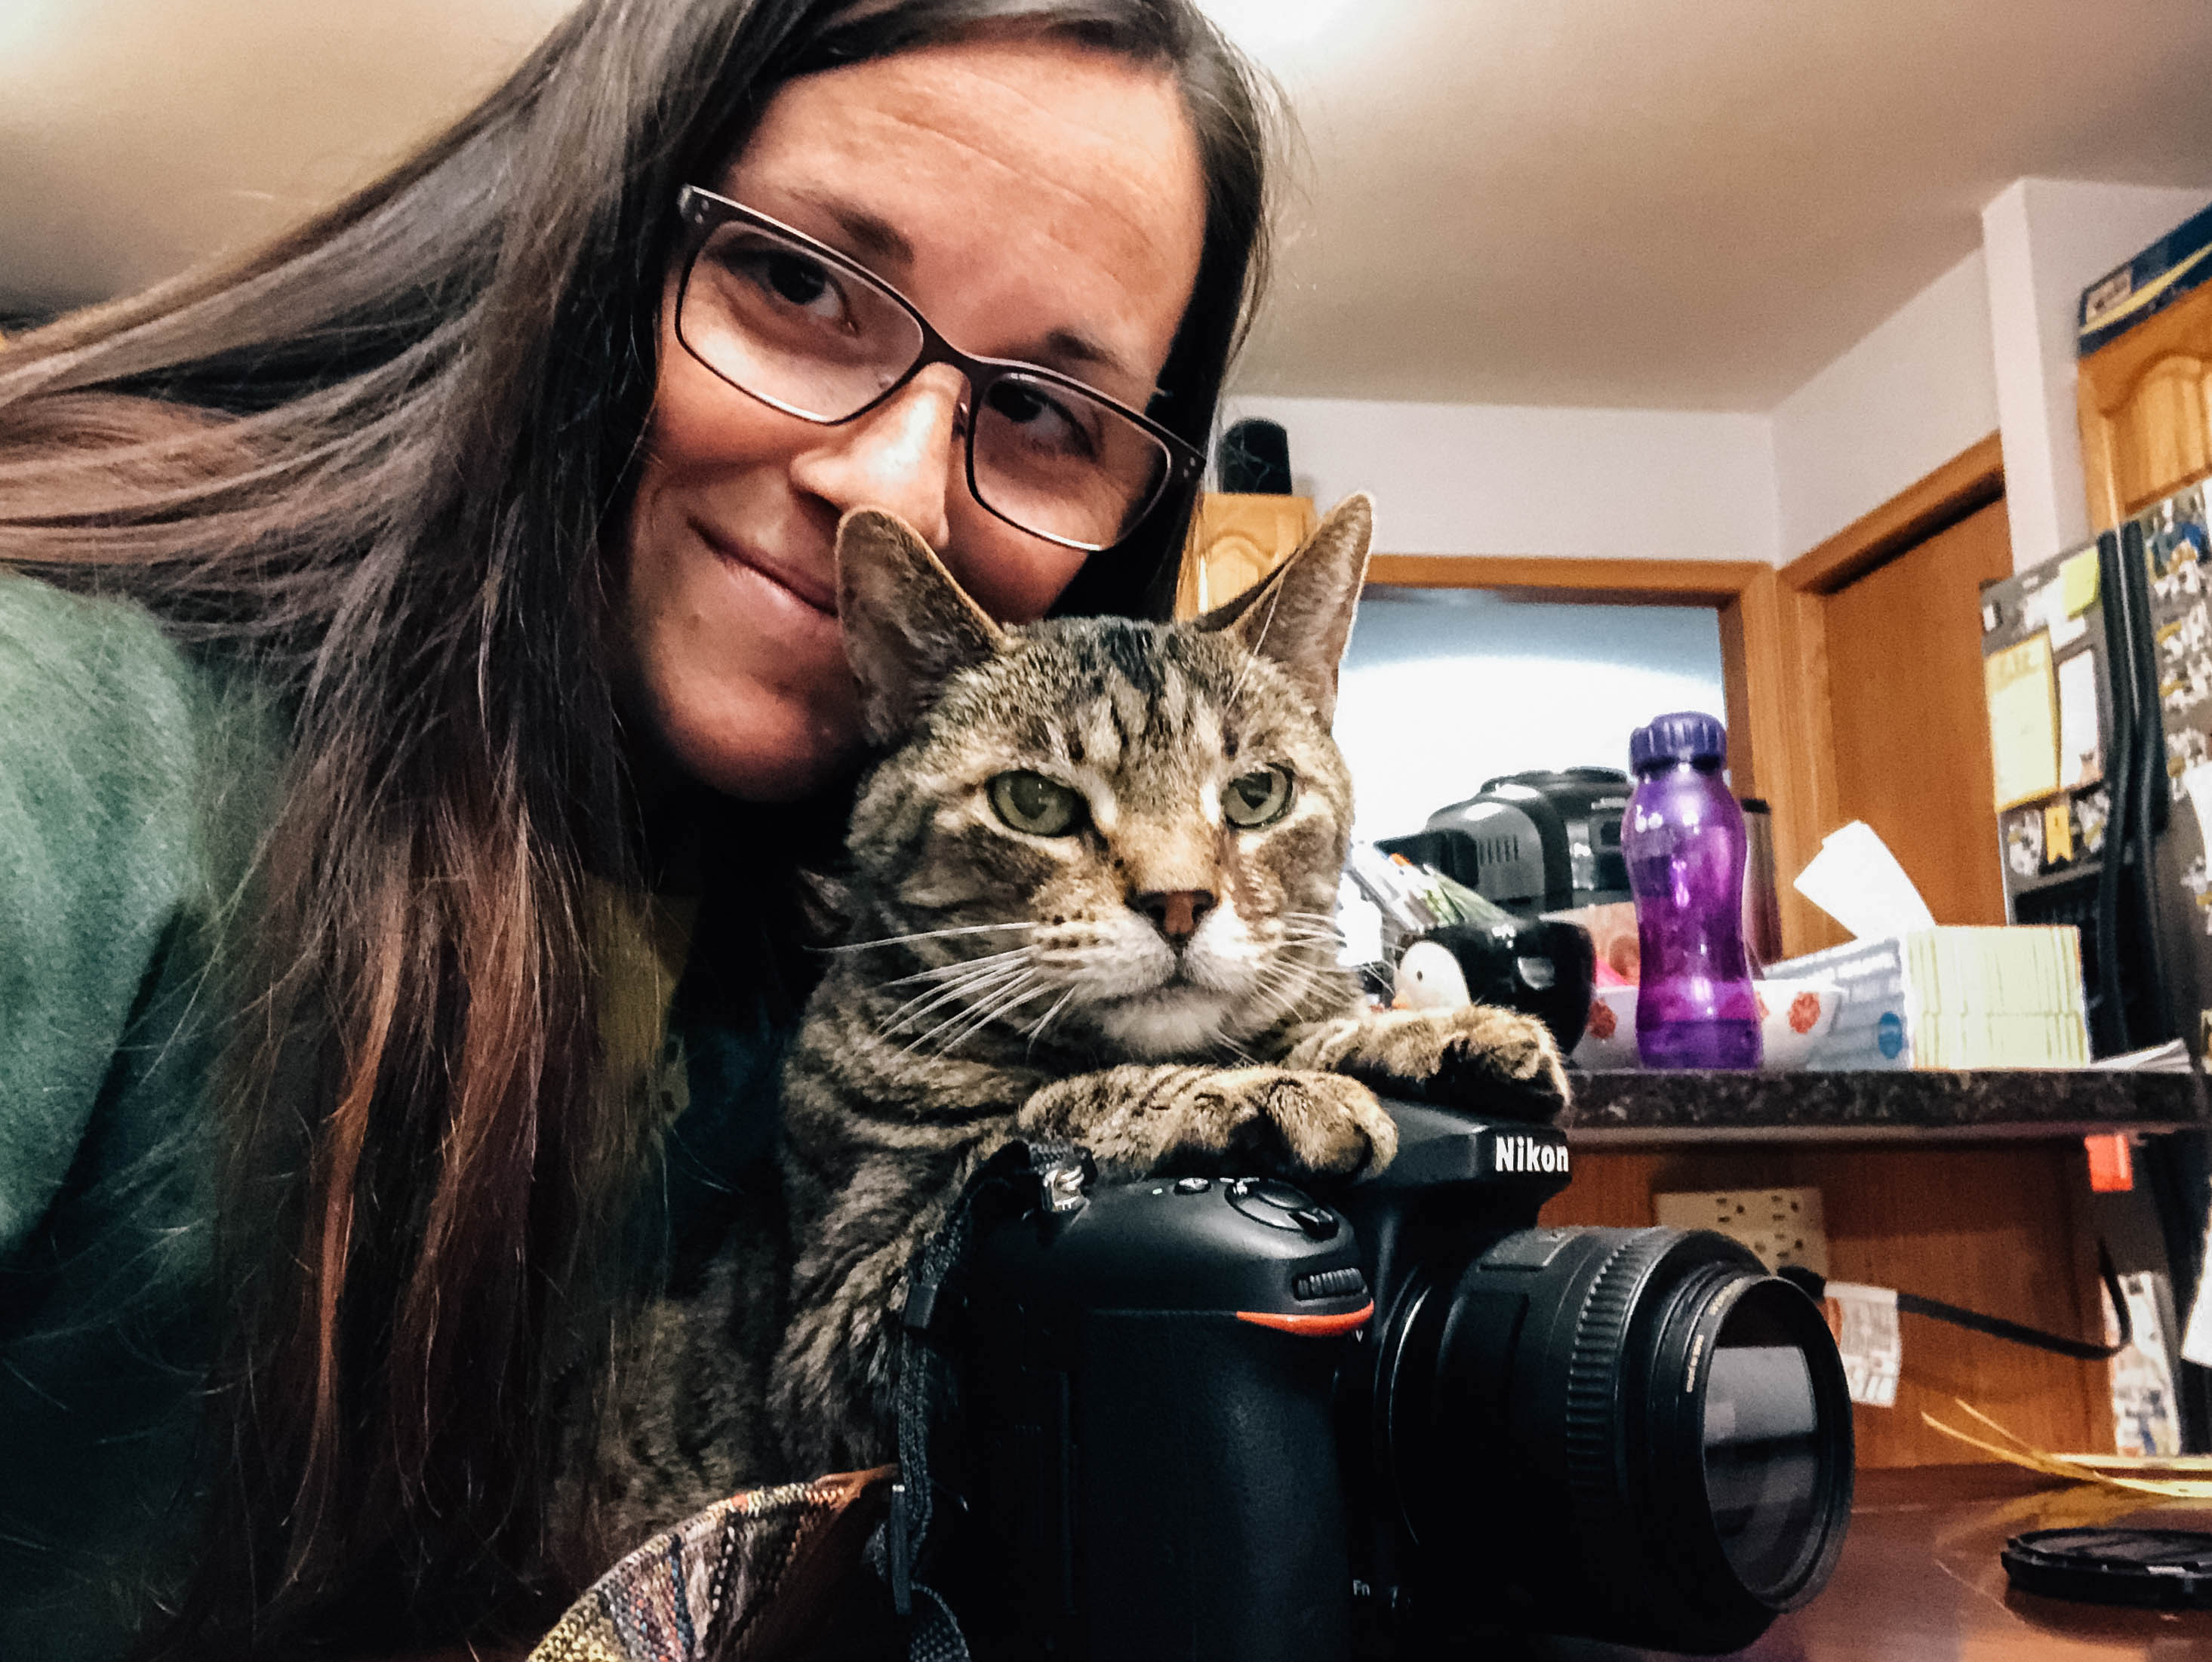 Dawn with her cat and camera